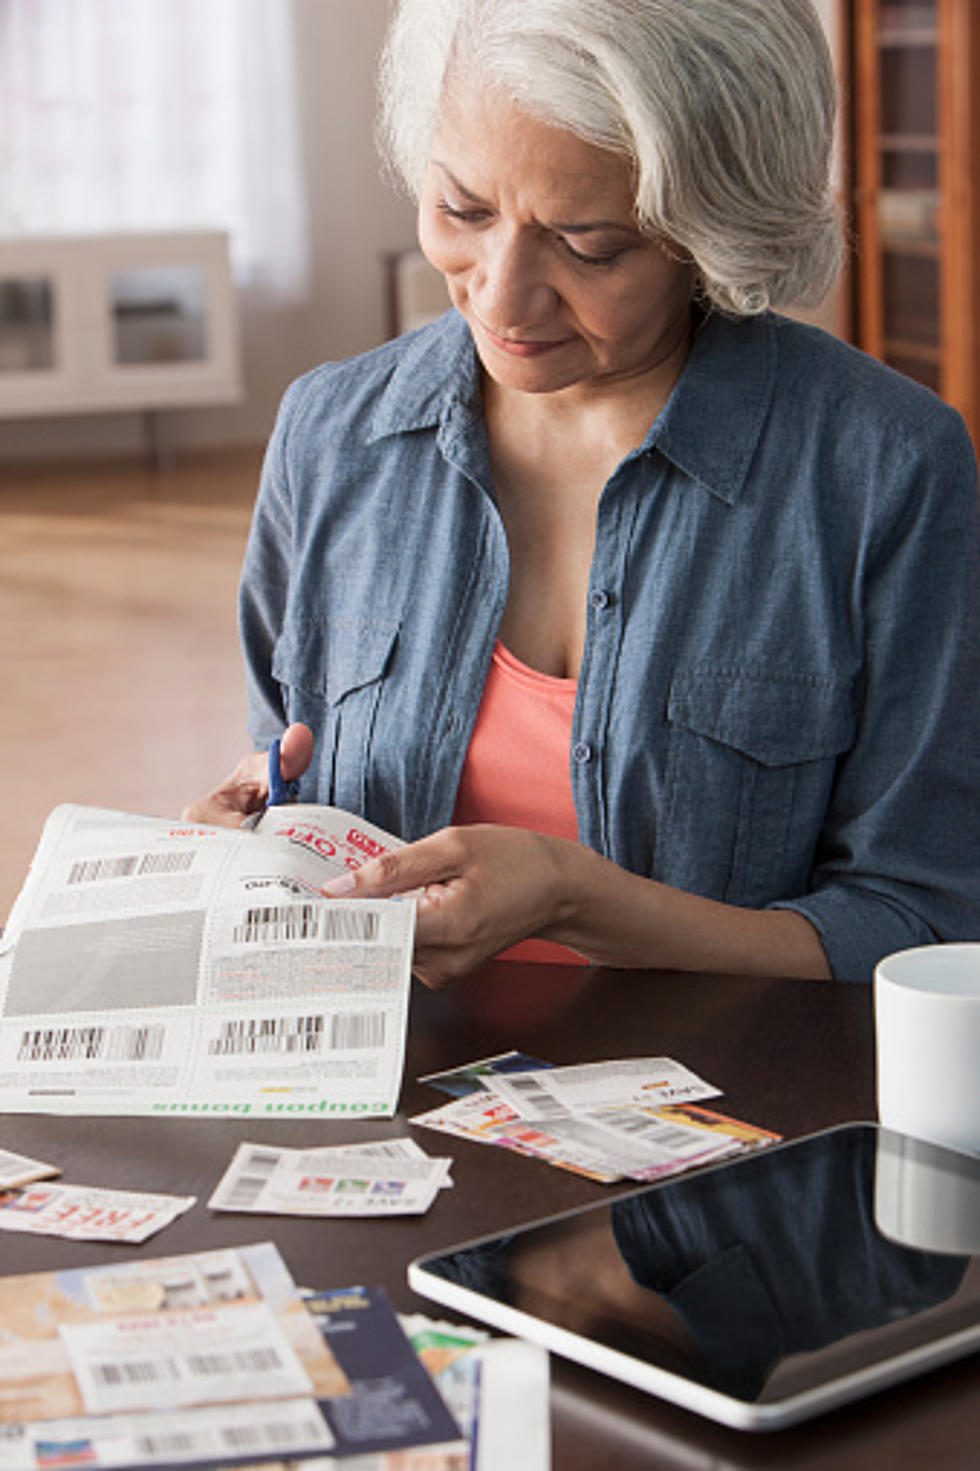 A Major Retailer In Illinois Is Cracking Down On Coupon Users